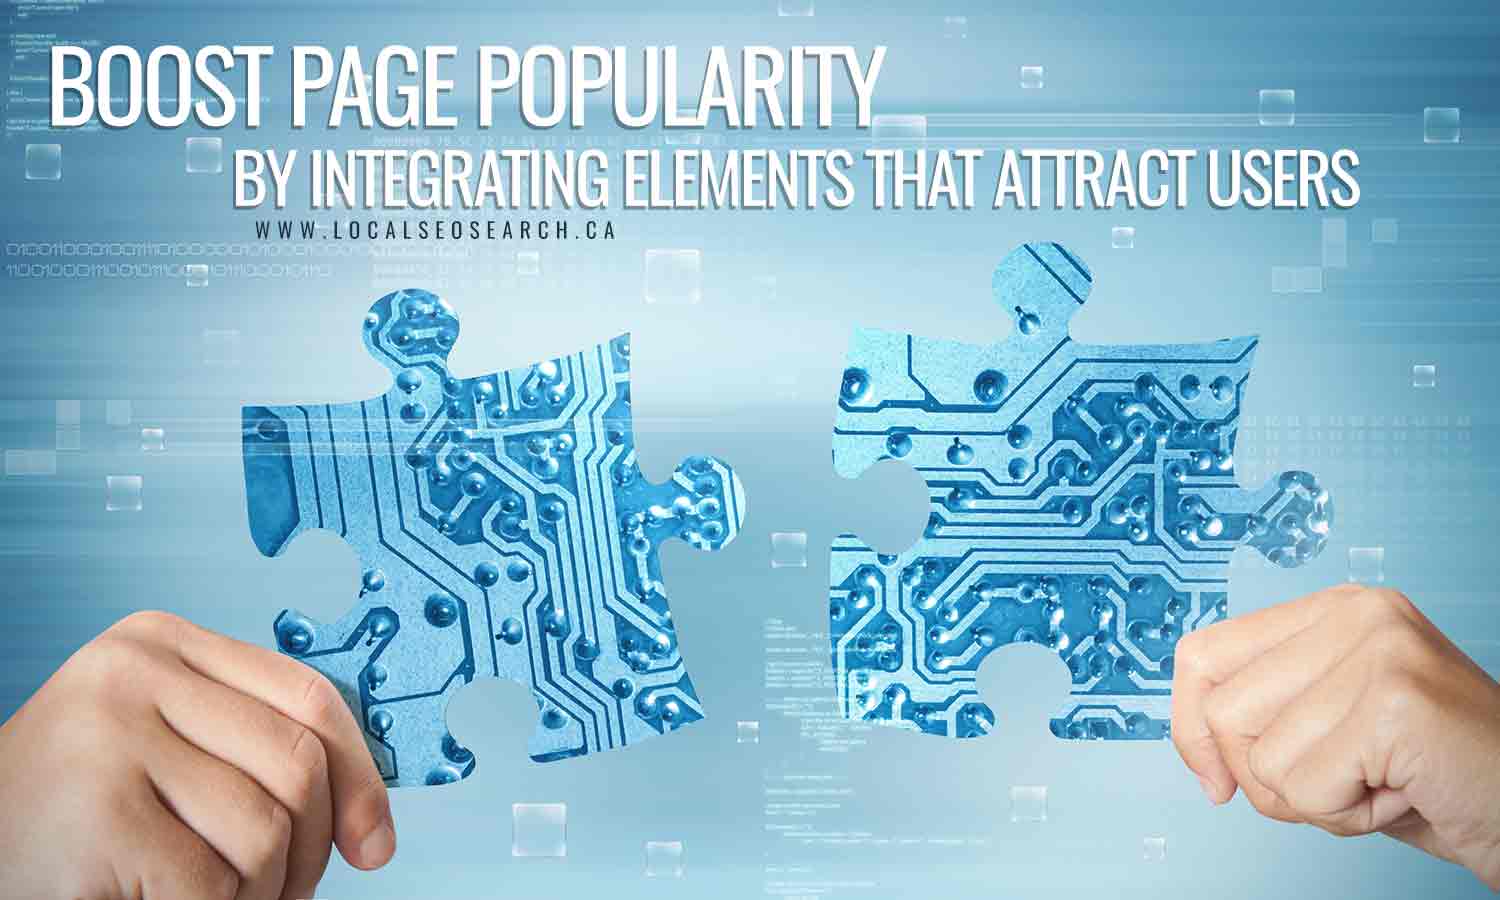 Boost page popularity by integrating elements